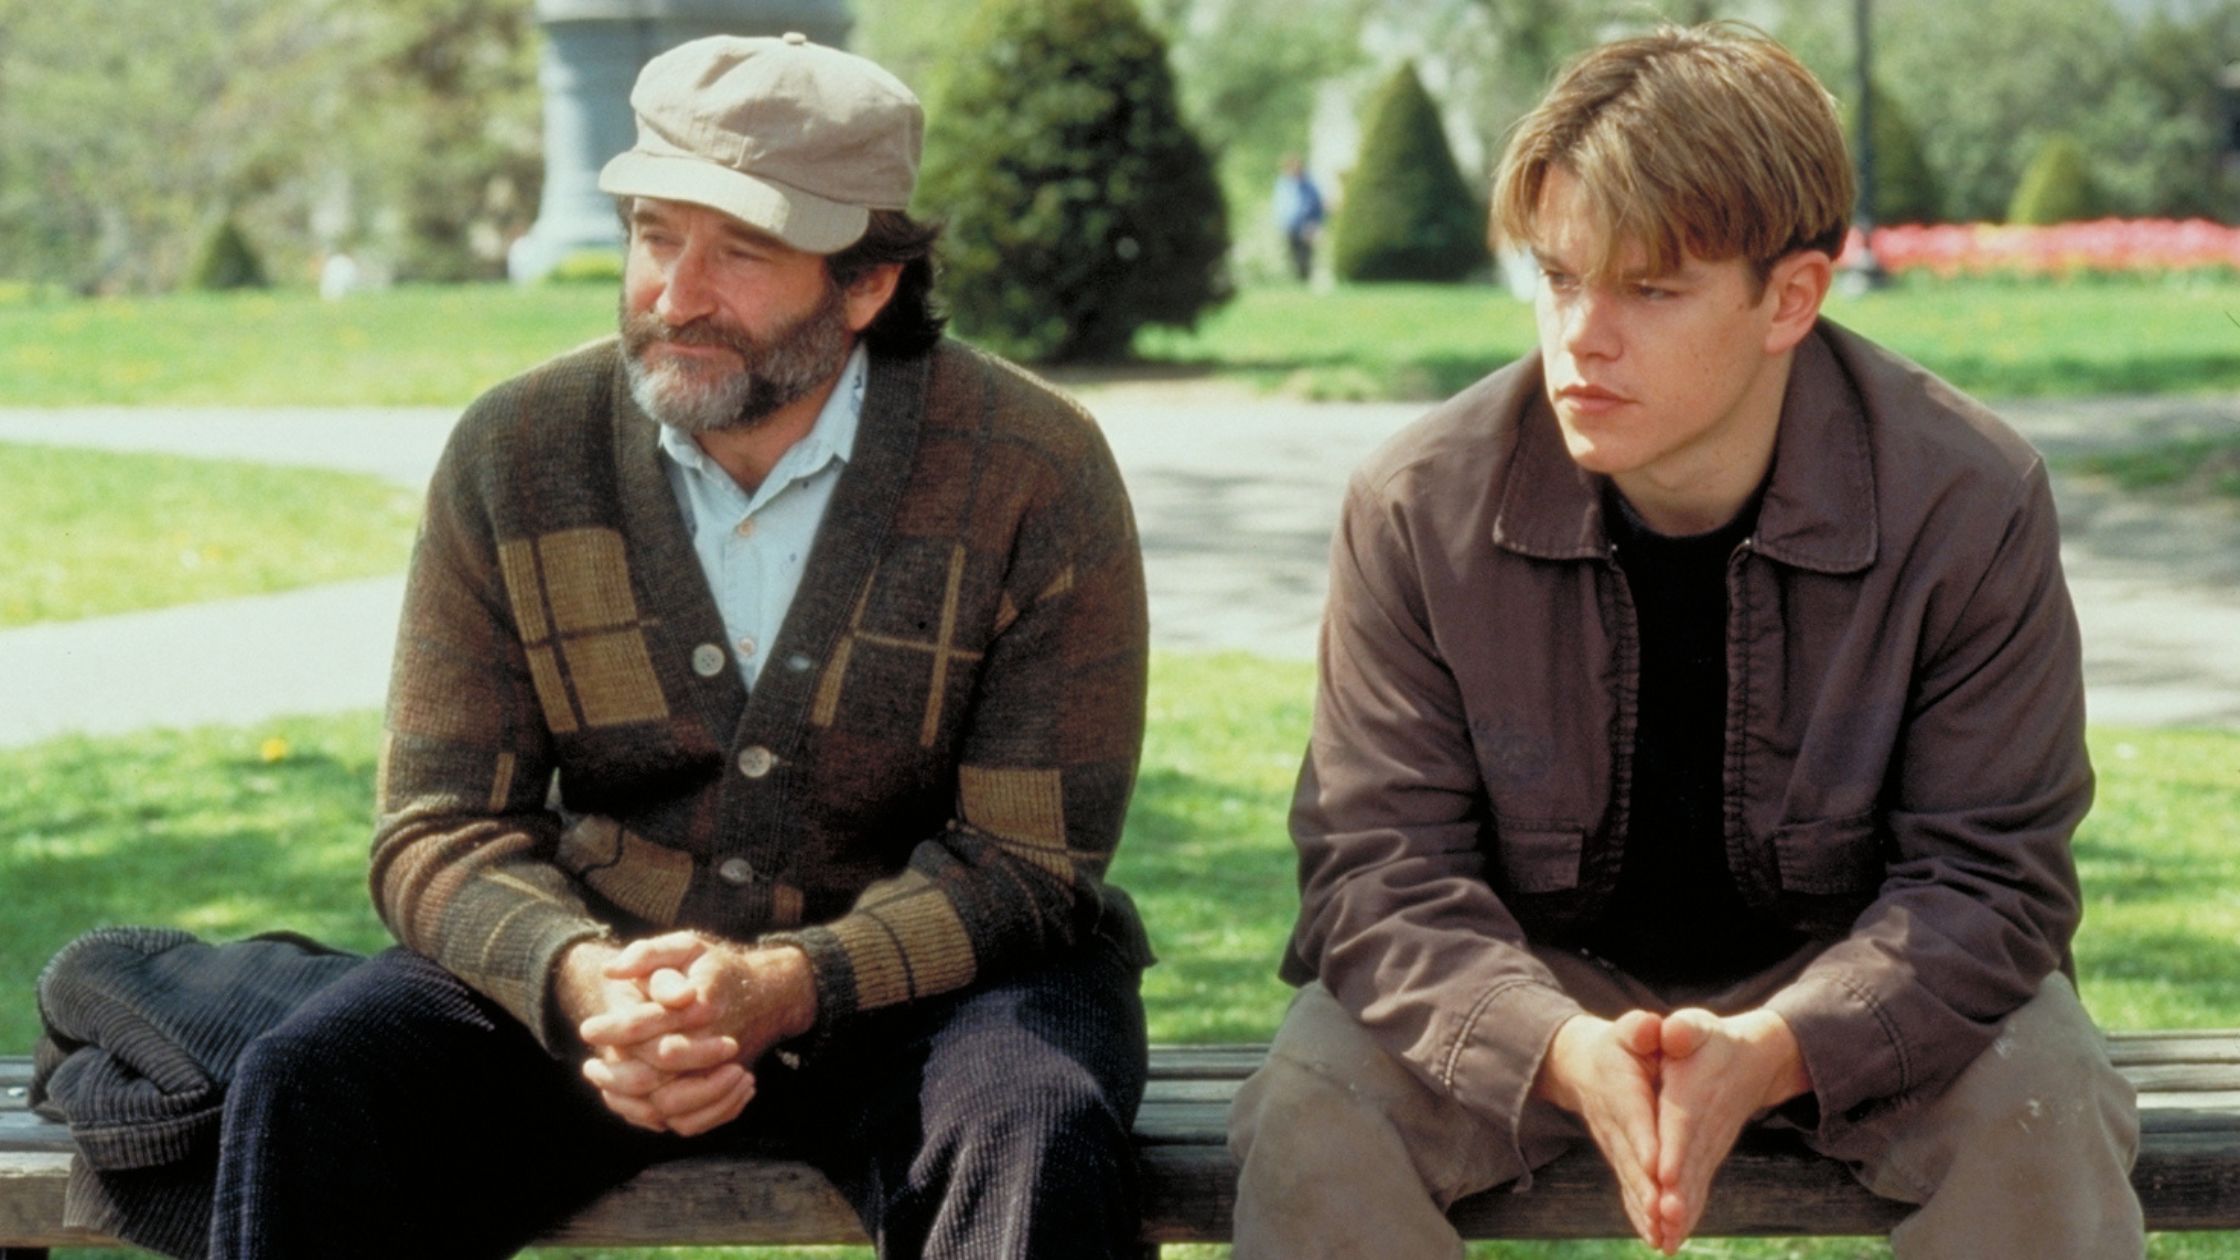 A view from the film Good Will Hunting